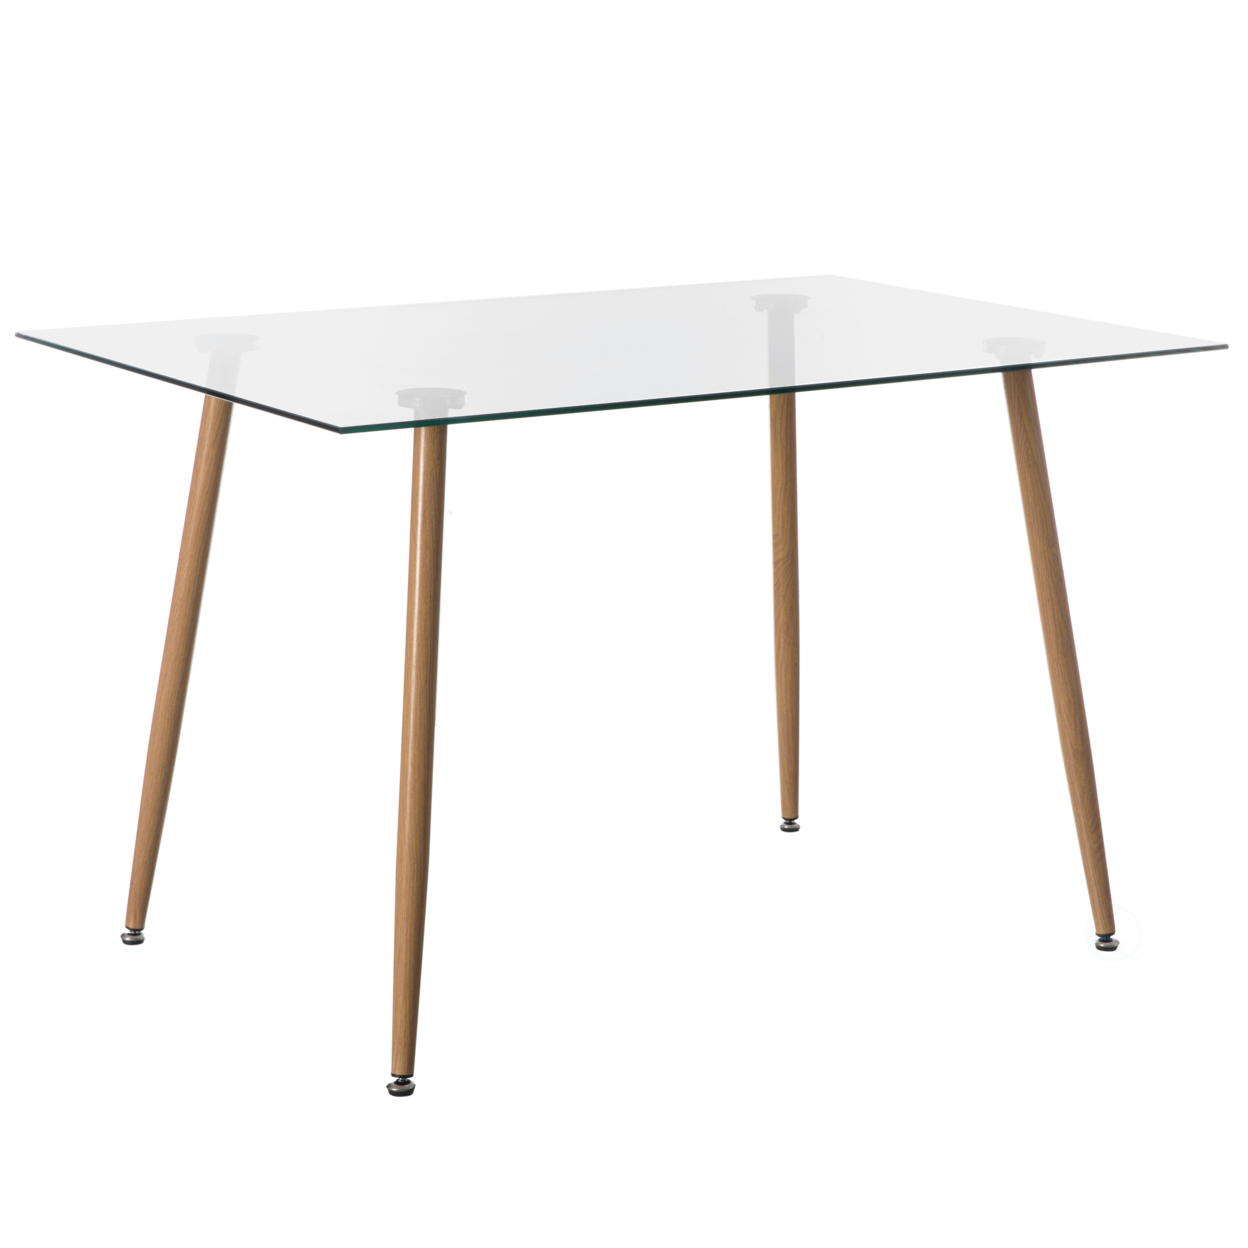 Rectangle Glass Top Accent Dining Table With Solid Wood Legs Modern Space Saving Small Leisure Tea Desk